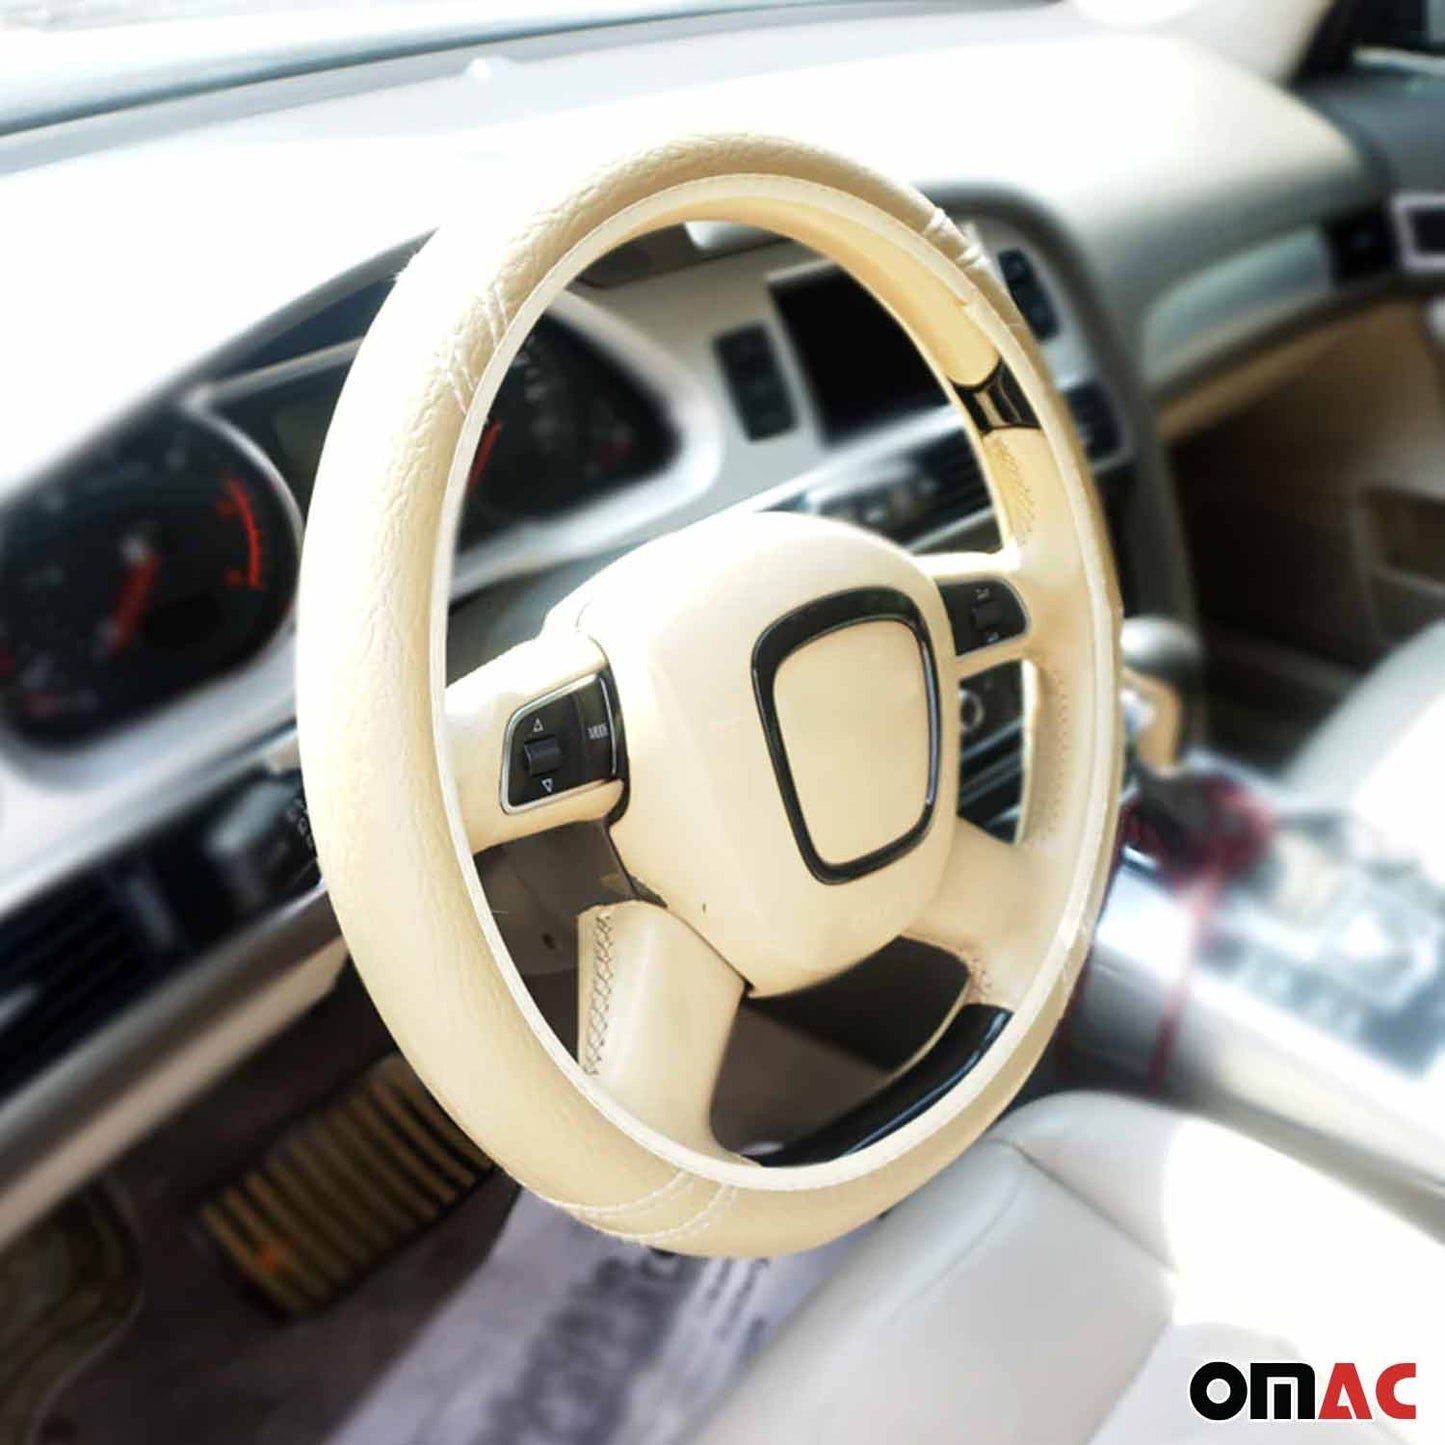 OMAC Fits Lincoln 15" Steering Wheel Cover Dark Beige Leather Anti-slip Breathable 96AM074-25825